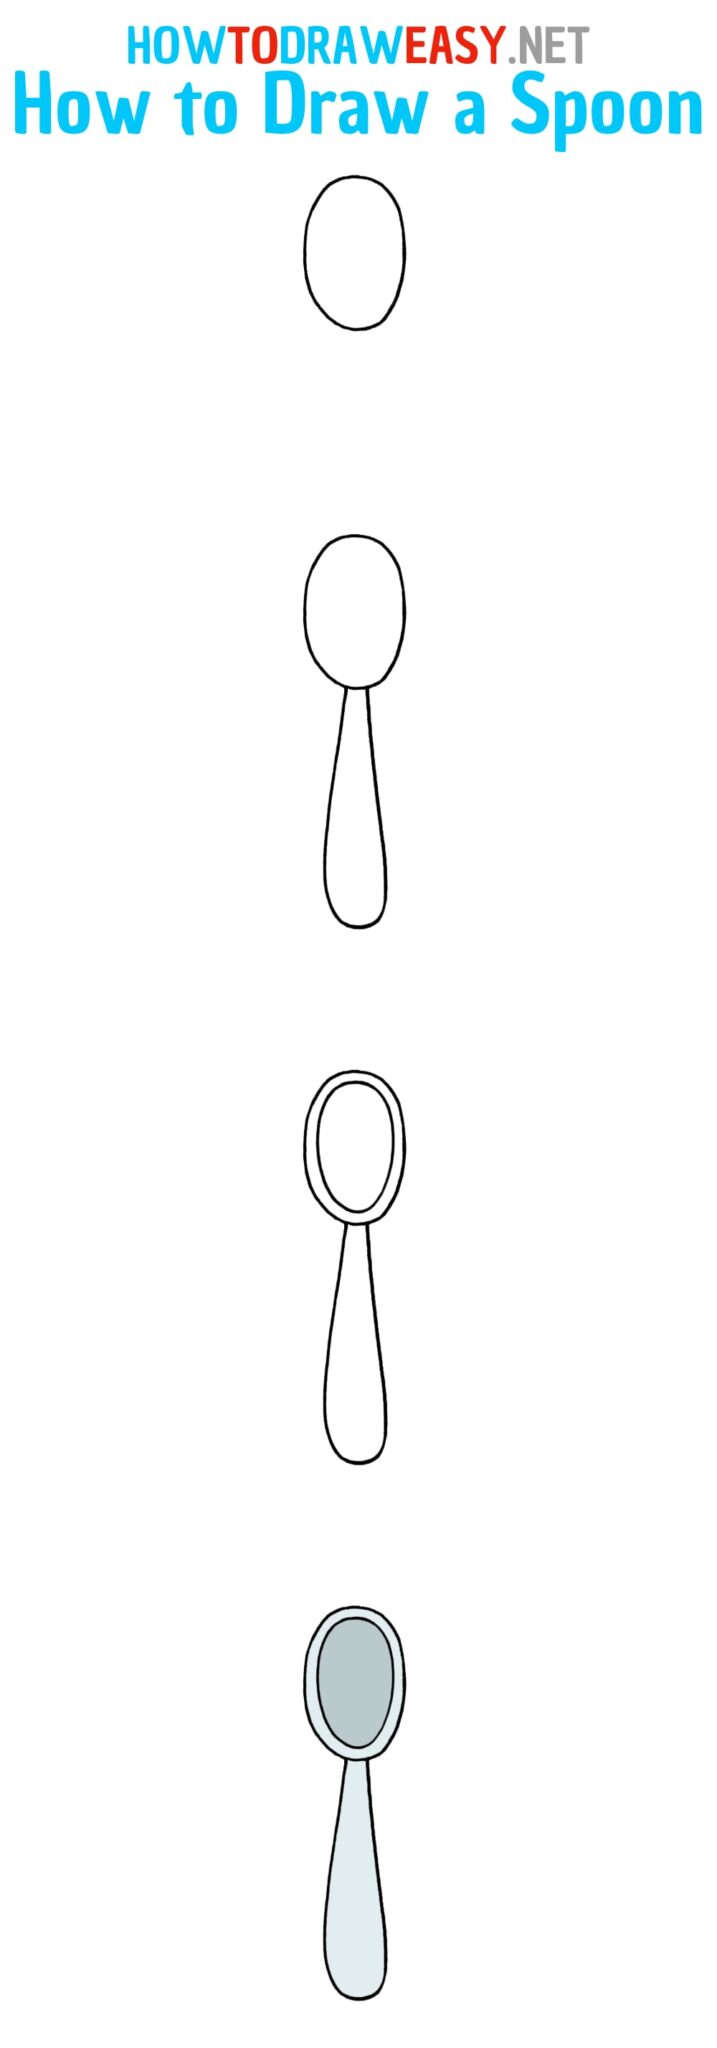 How to Draw a Spoon for Kids How to Draw Easy